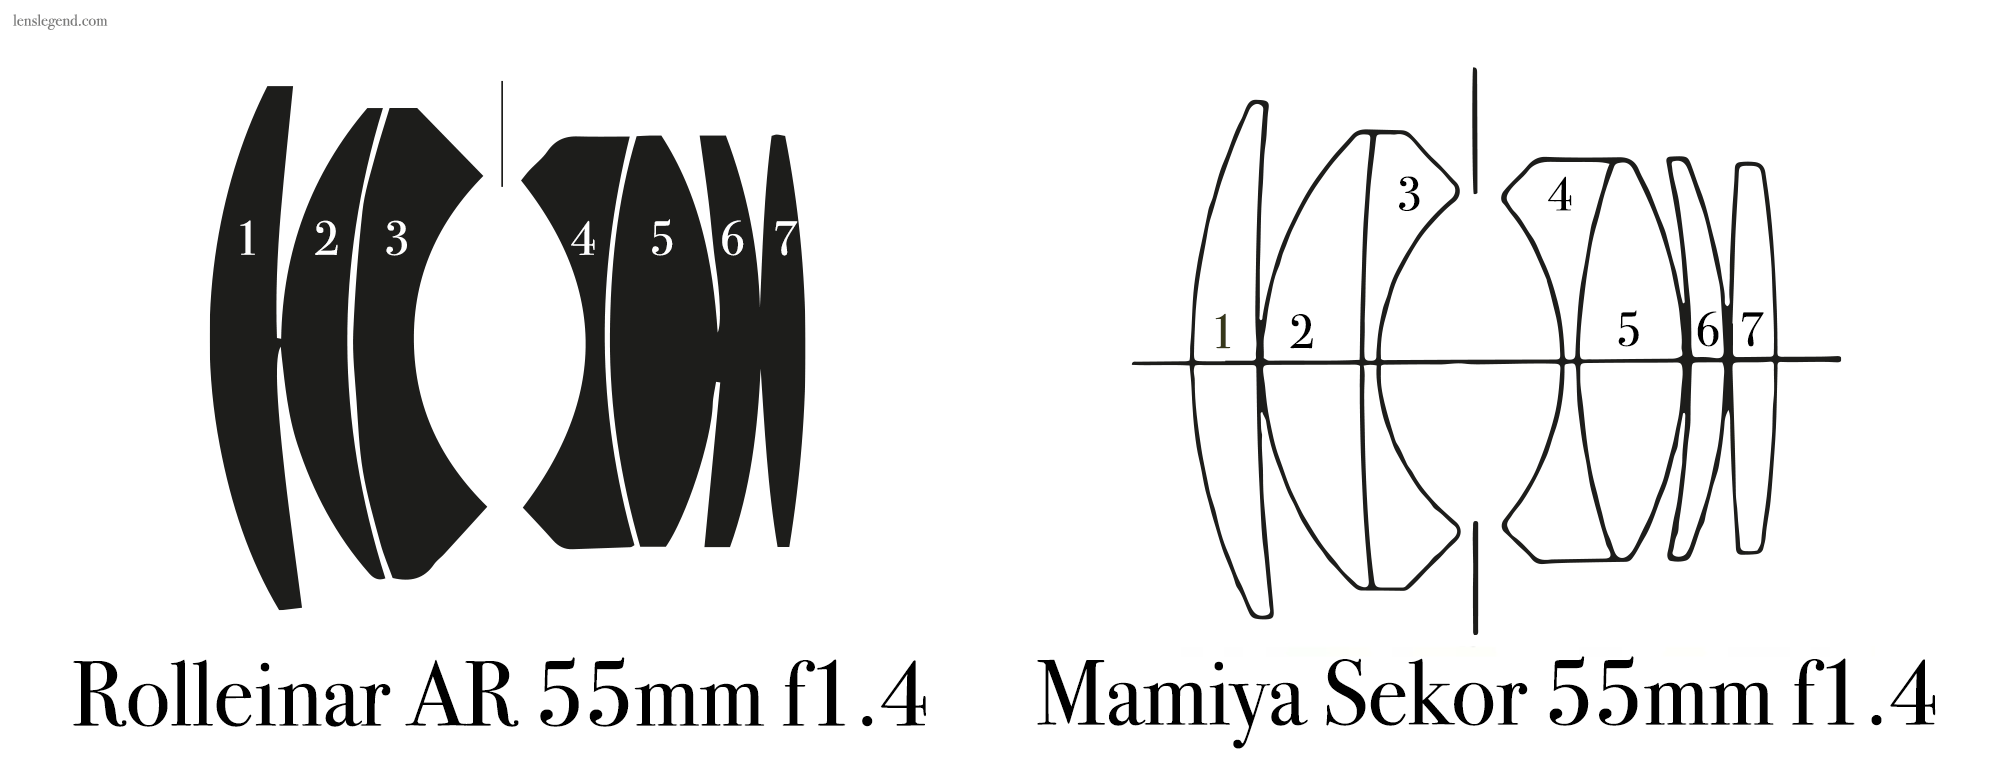 Comparison of the Rolleinar AR 55mm f1.4 to the Mamiya Sekor 55mm f1.4